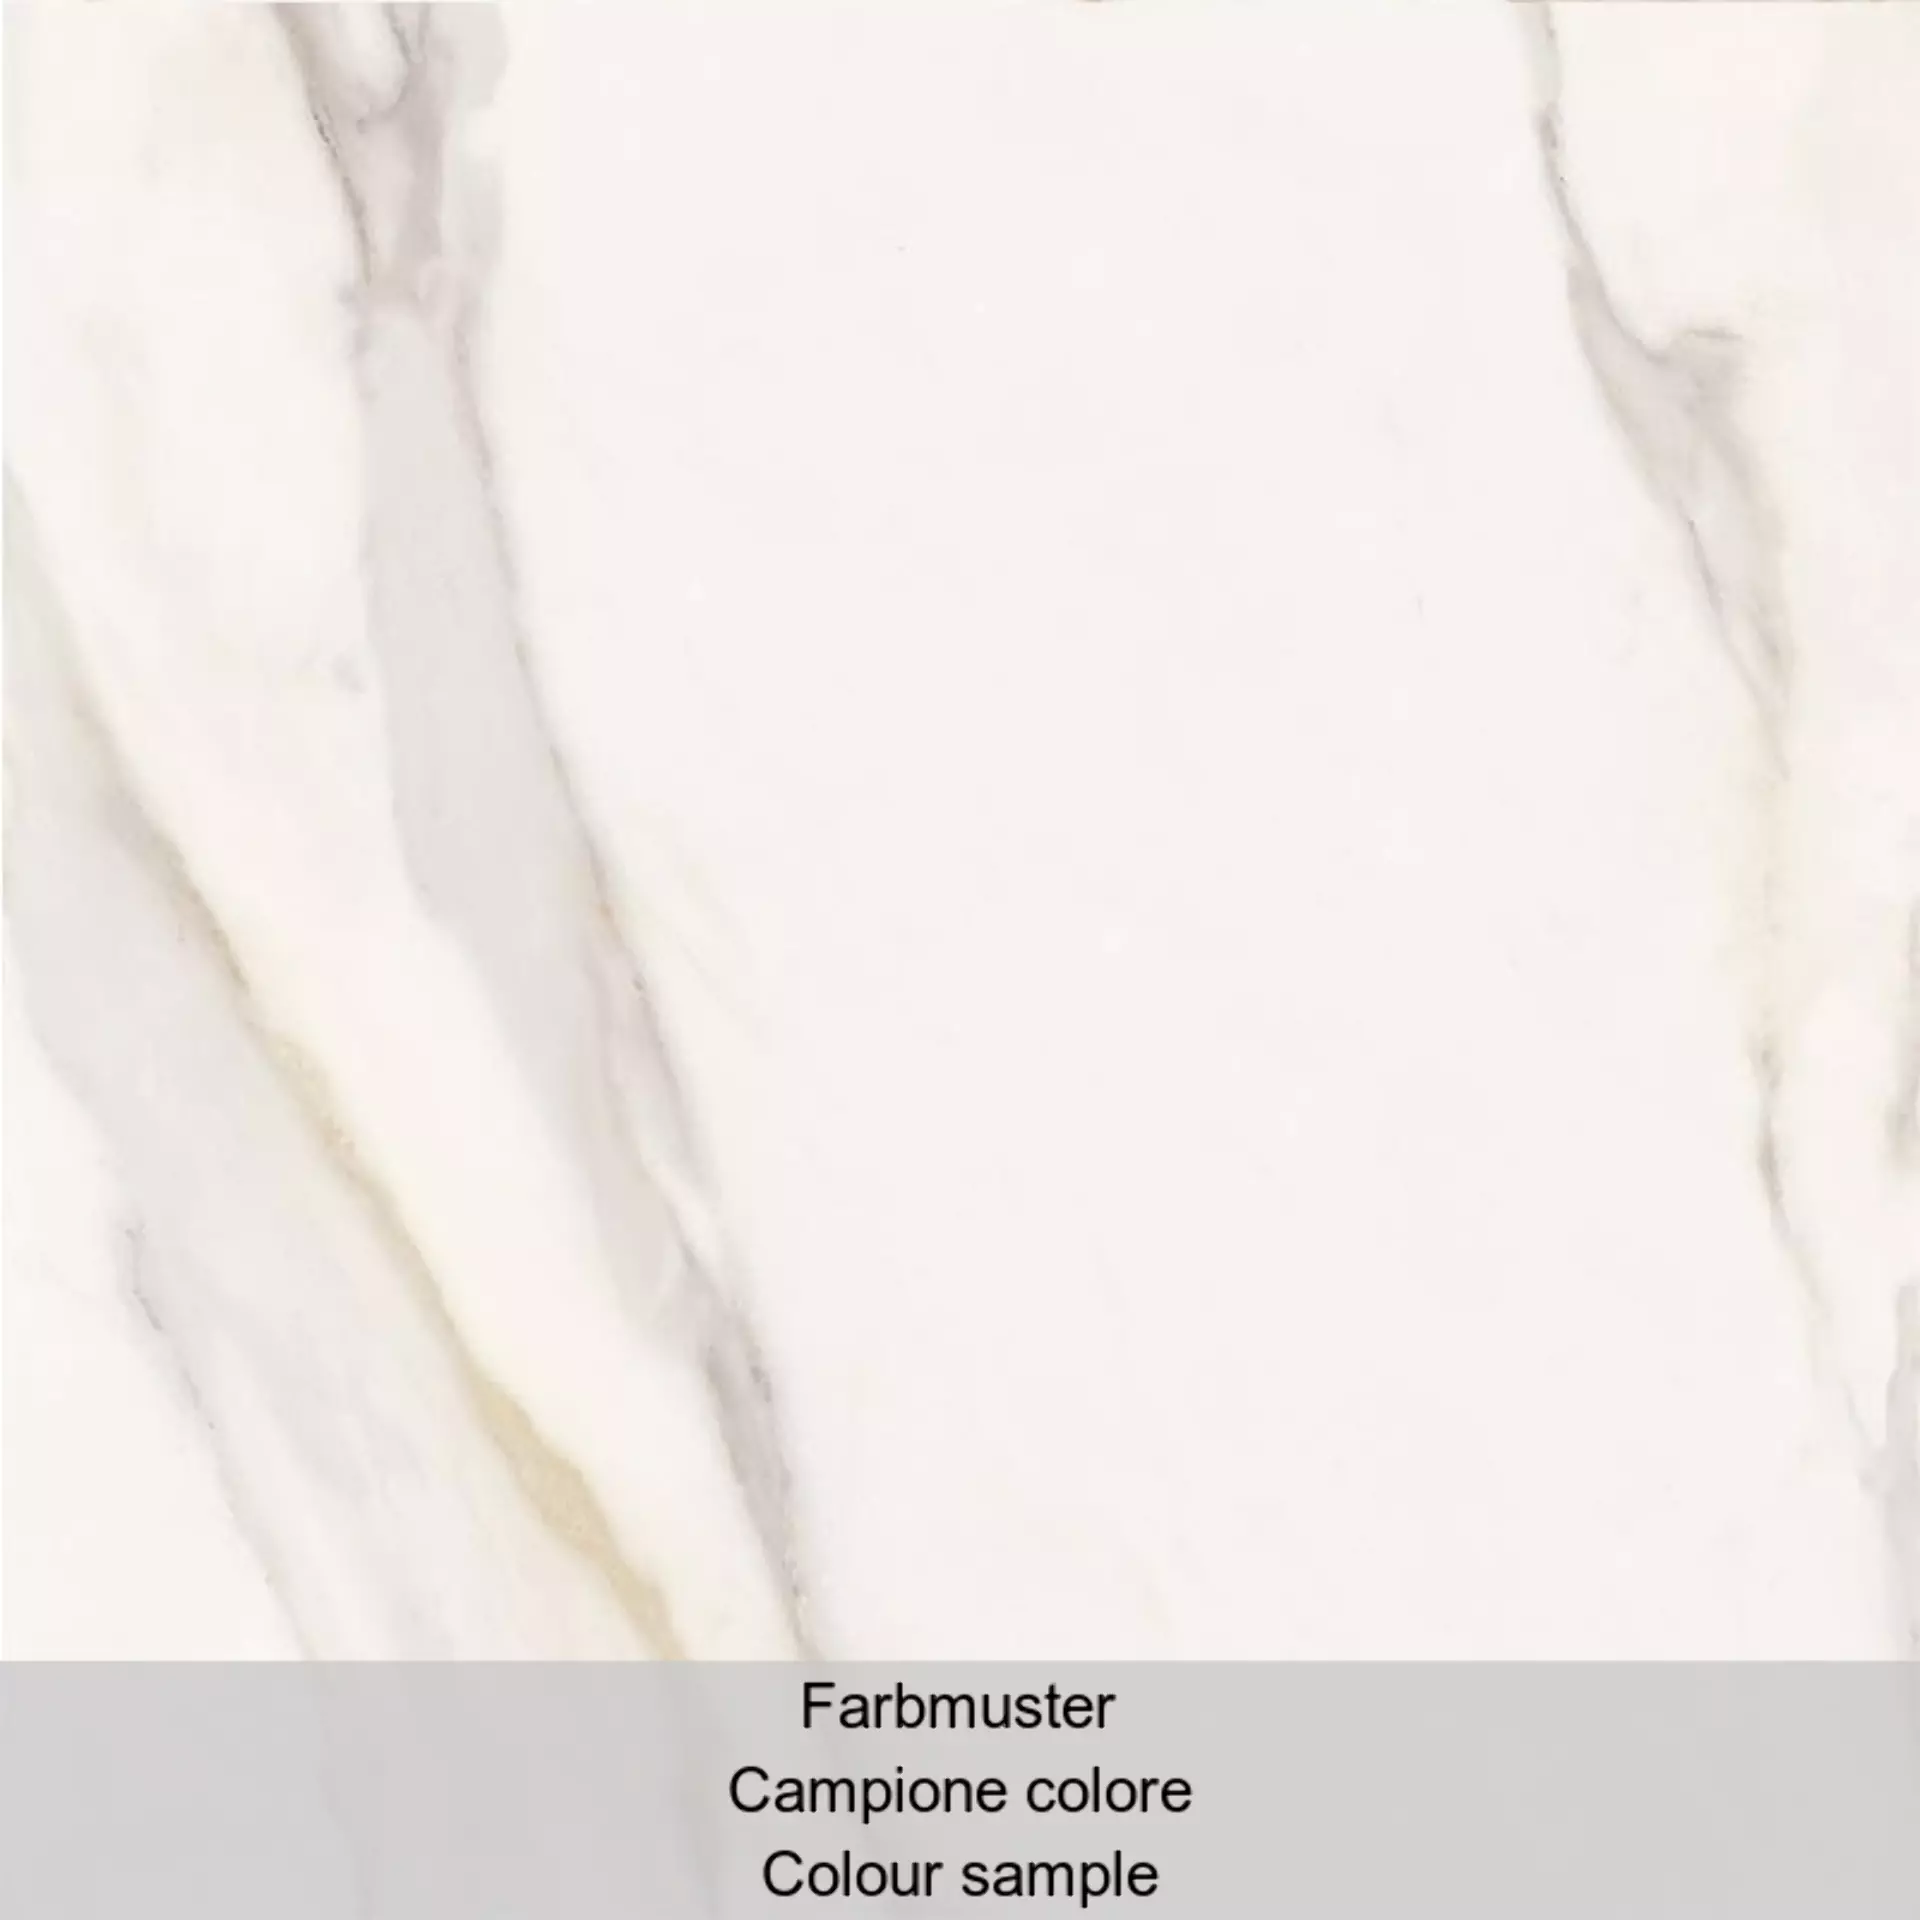 Supergres Purity Marbl Calacatta Lux 12CX 120x120cm rectified 9mm